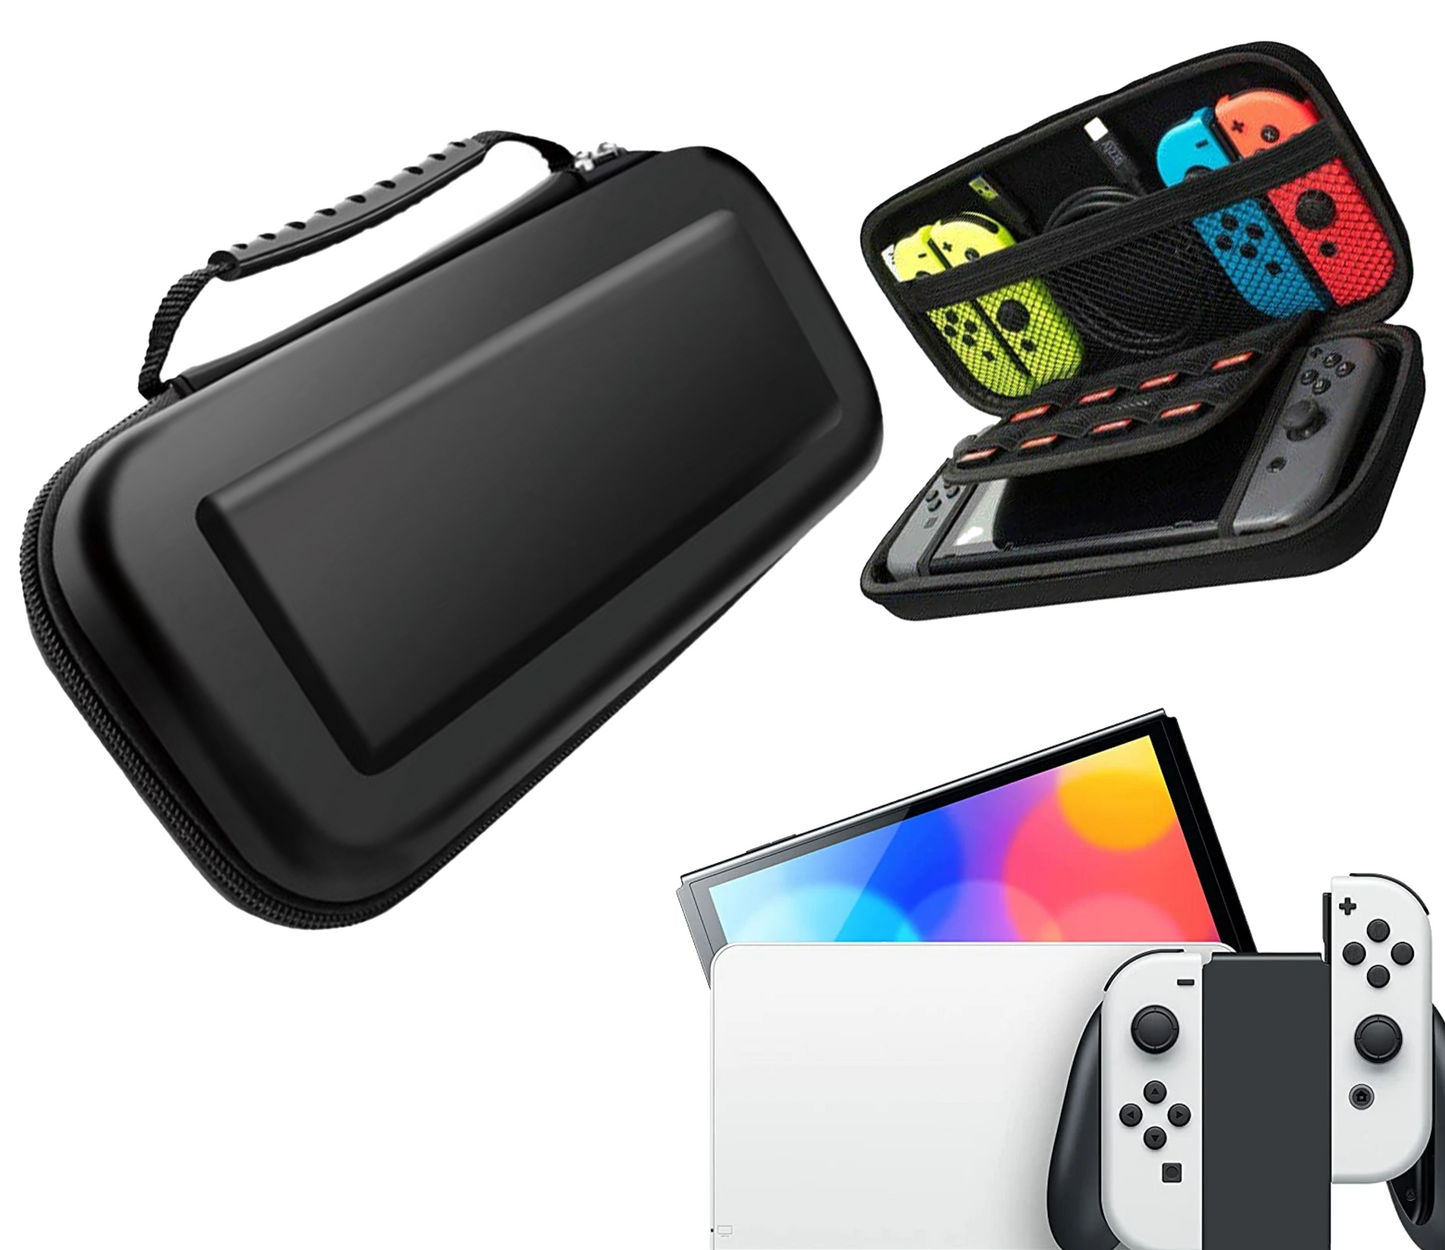 Protective cover | Hardcase Storage Cover | Case | Black | Accessories suitable for Nintendo Switch LITE